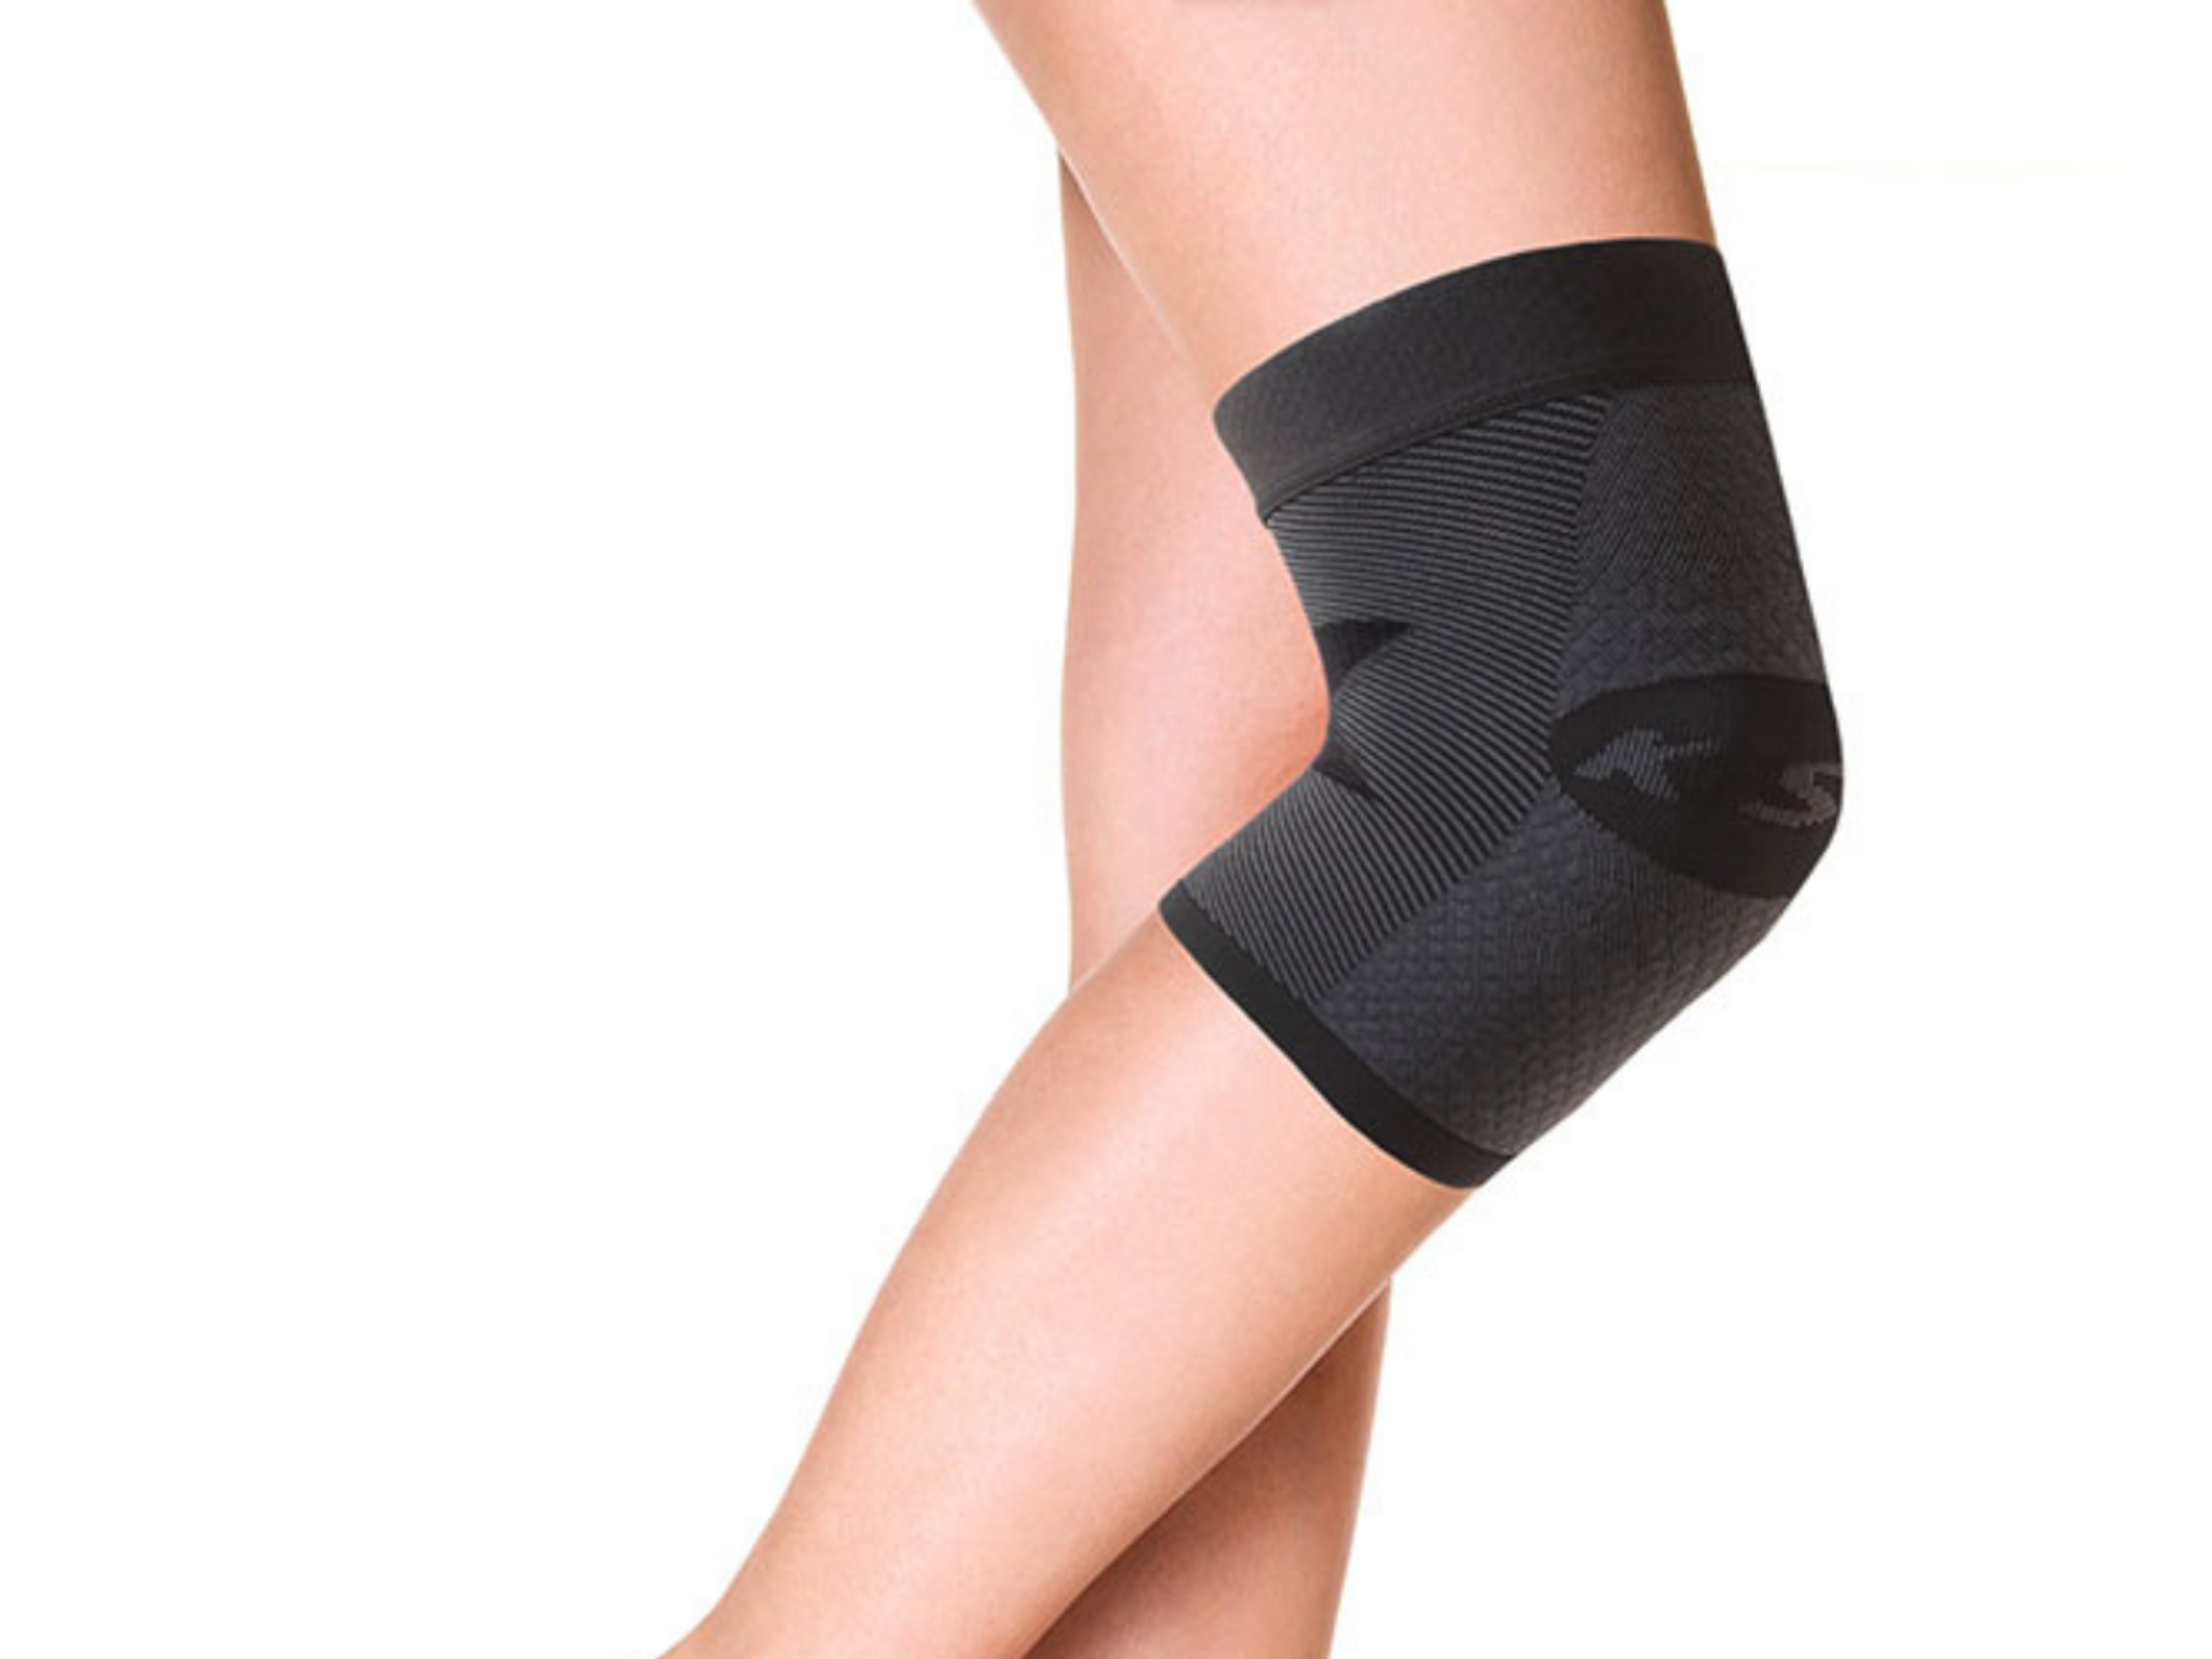 Knee support sleeves can help improve your proprioception after meniscus strains.